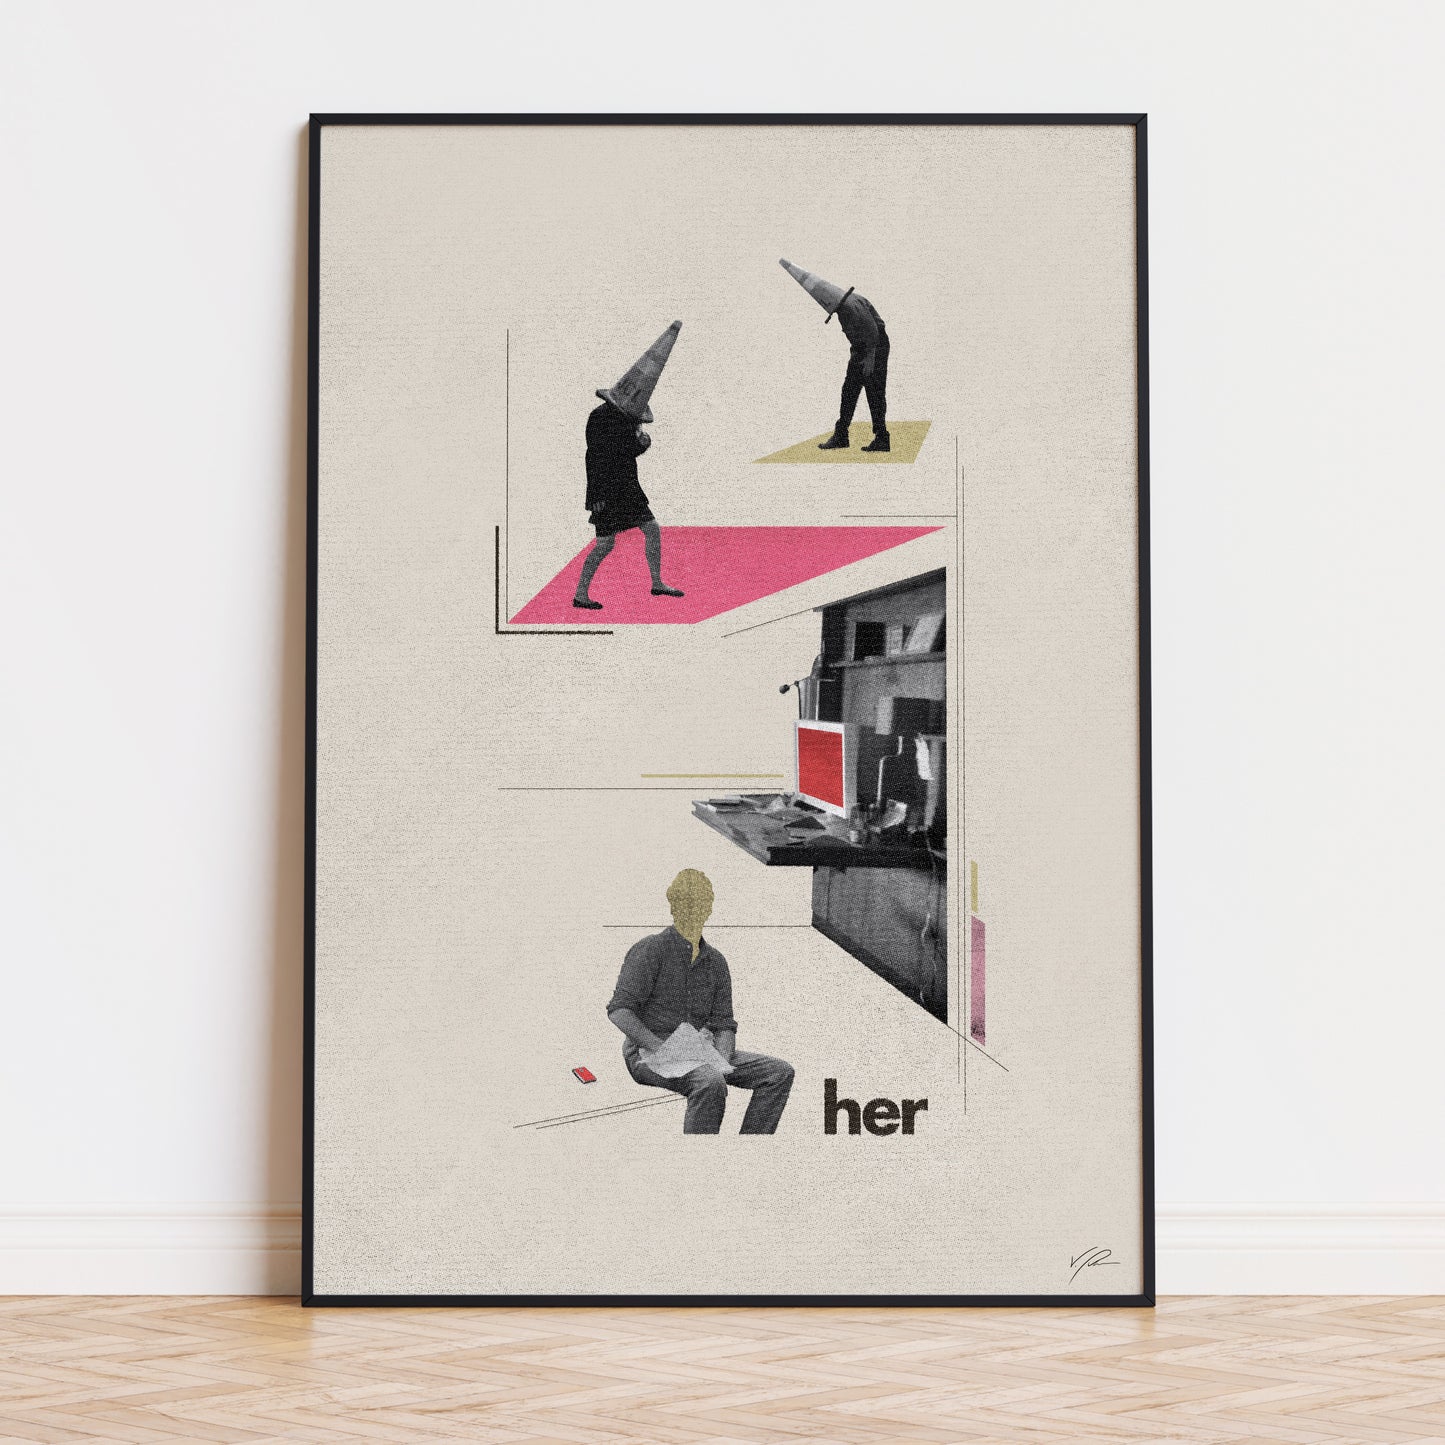 Her - Poster - art print, boutique, her, hipster, love, mid century, modern, movie poster, nursery, poster, romance, shapes, spike jonze